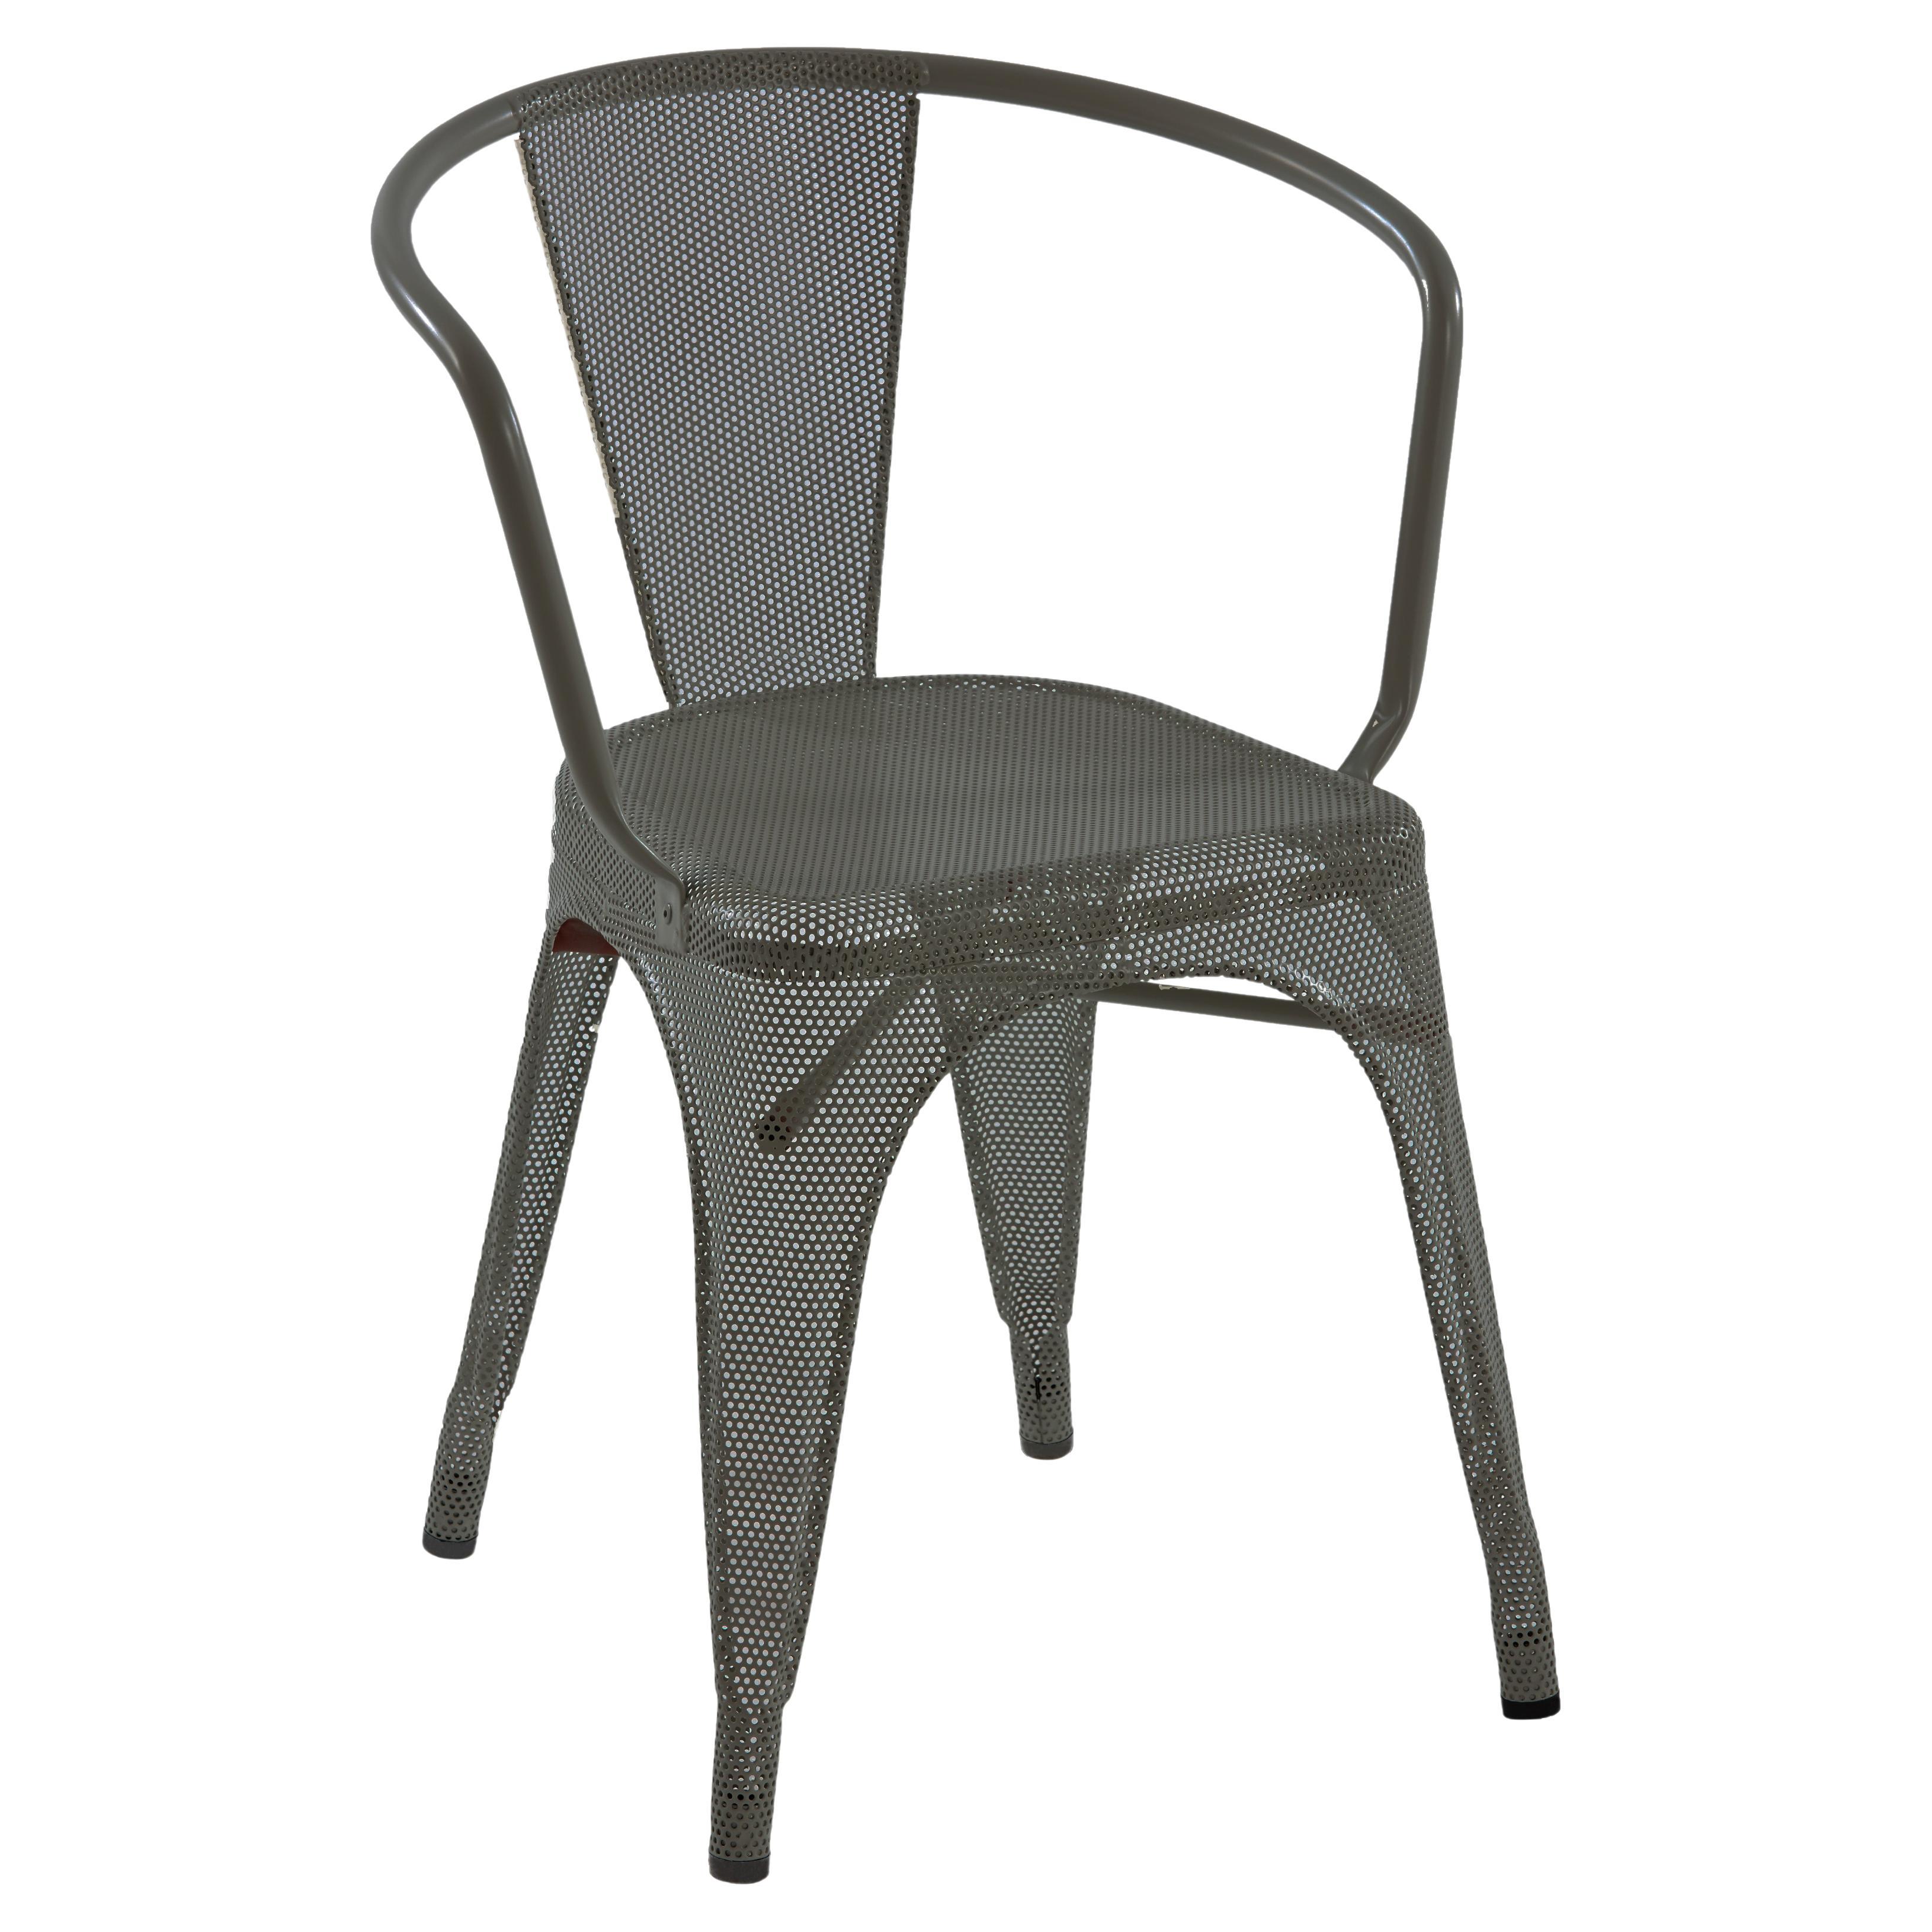 Tolix A56 Arm Chair Perforated Outdoor Painted in Graphite For Sale